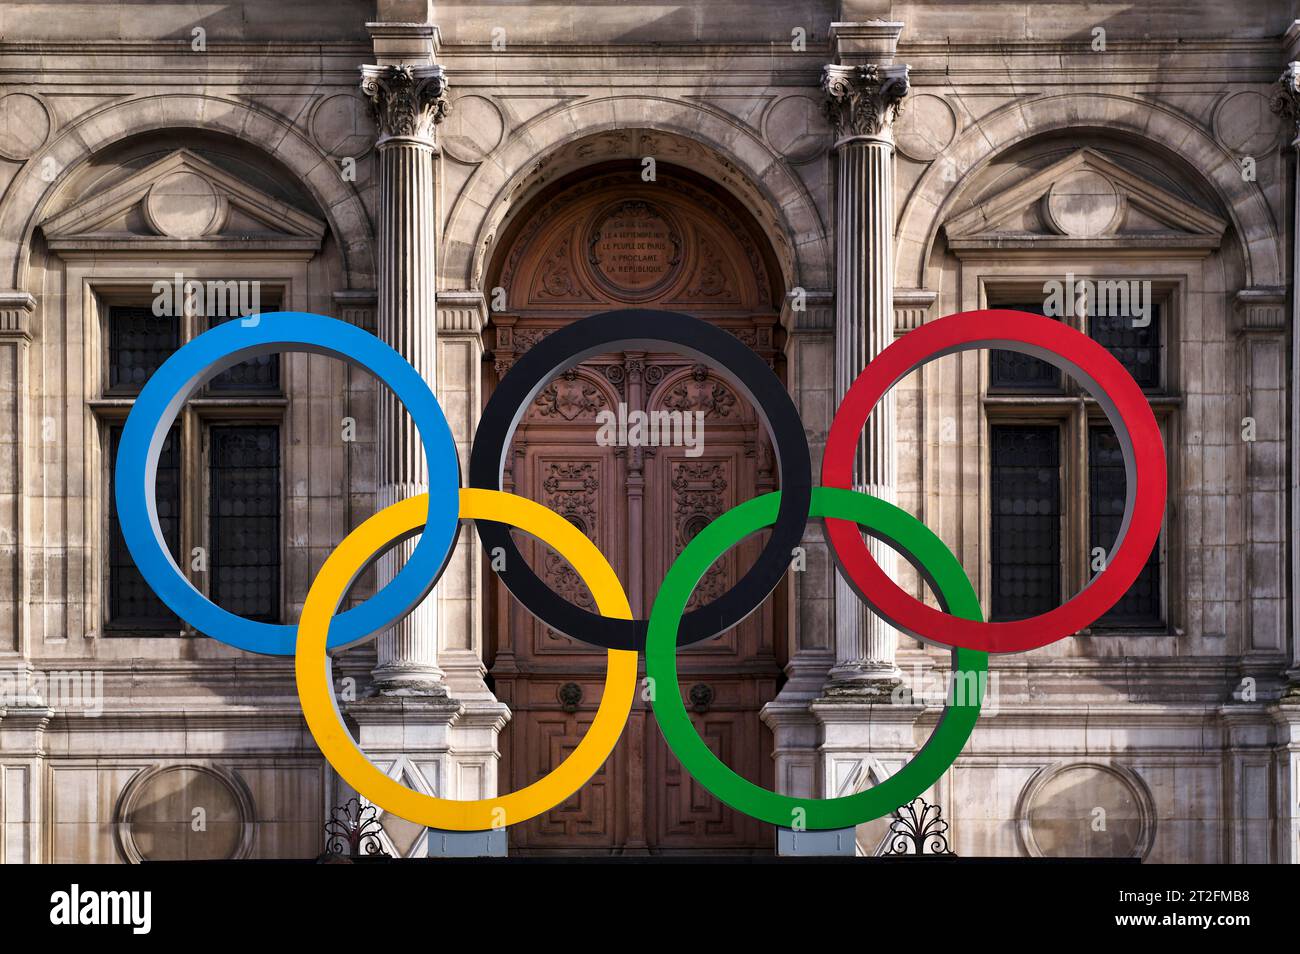 Olympic Rings, Olympic Games, Logo, on the occasion of the 2024 Olympics in Paris, City Hall, Hotel de Ville, Paris, France Stock Photo